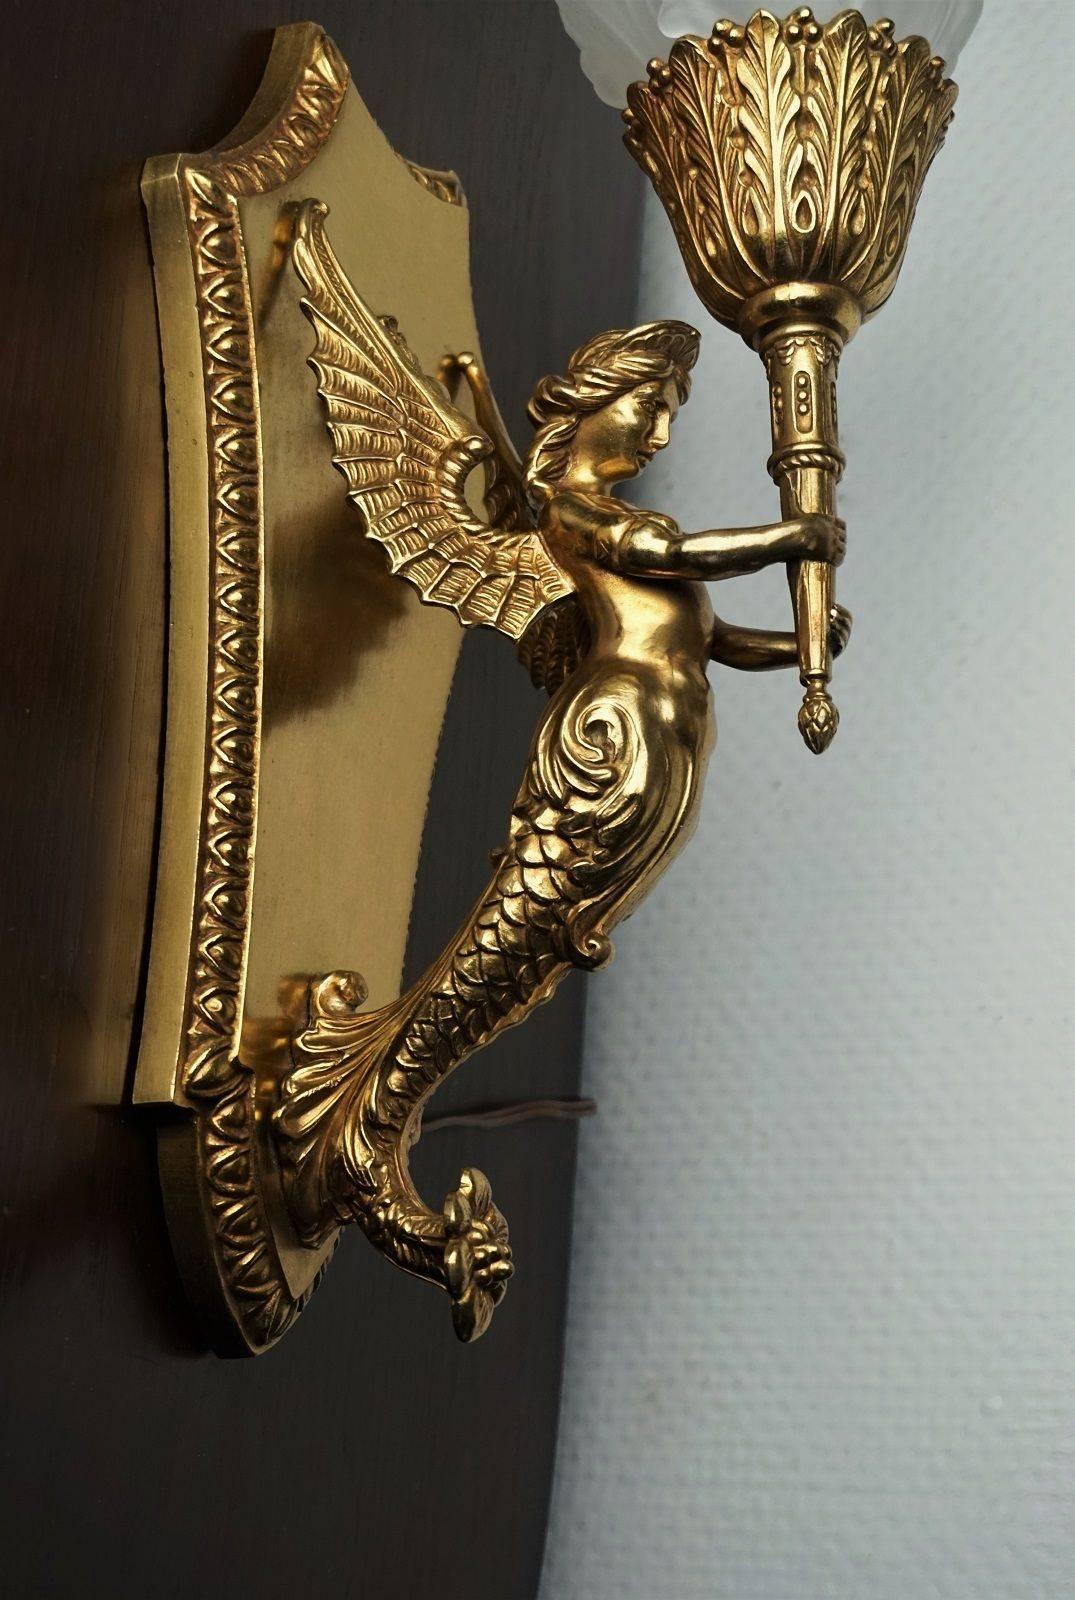 Frosted 19th Century French Empire Winged Figural Wall Sconce Candelabra Bronze Glass